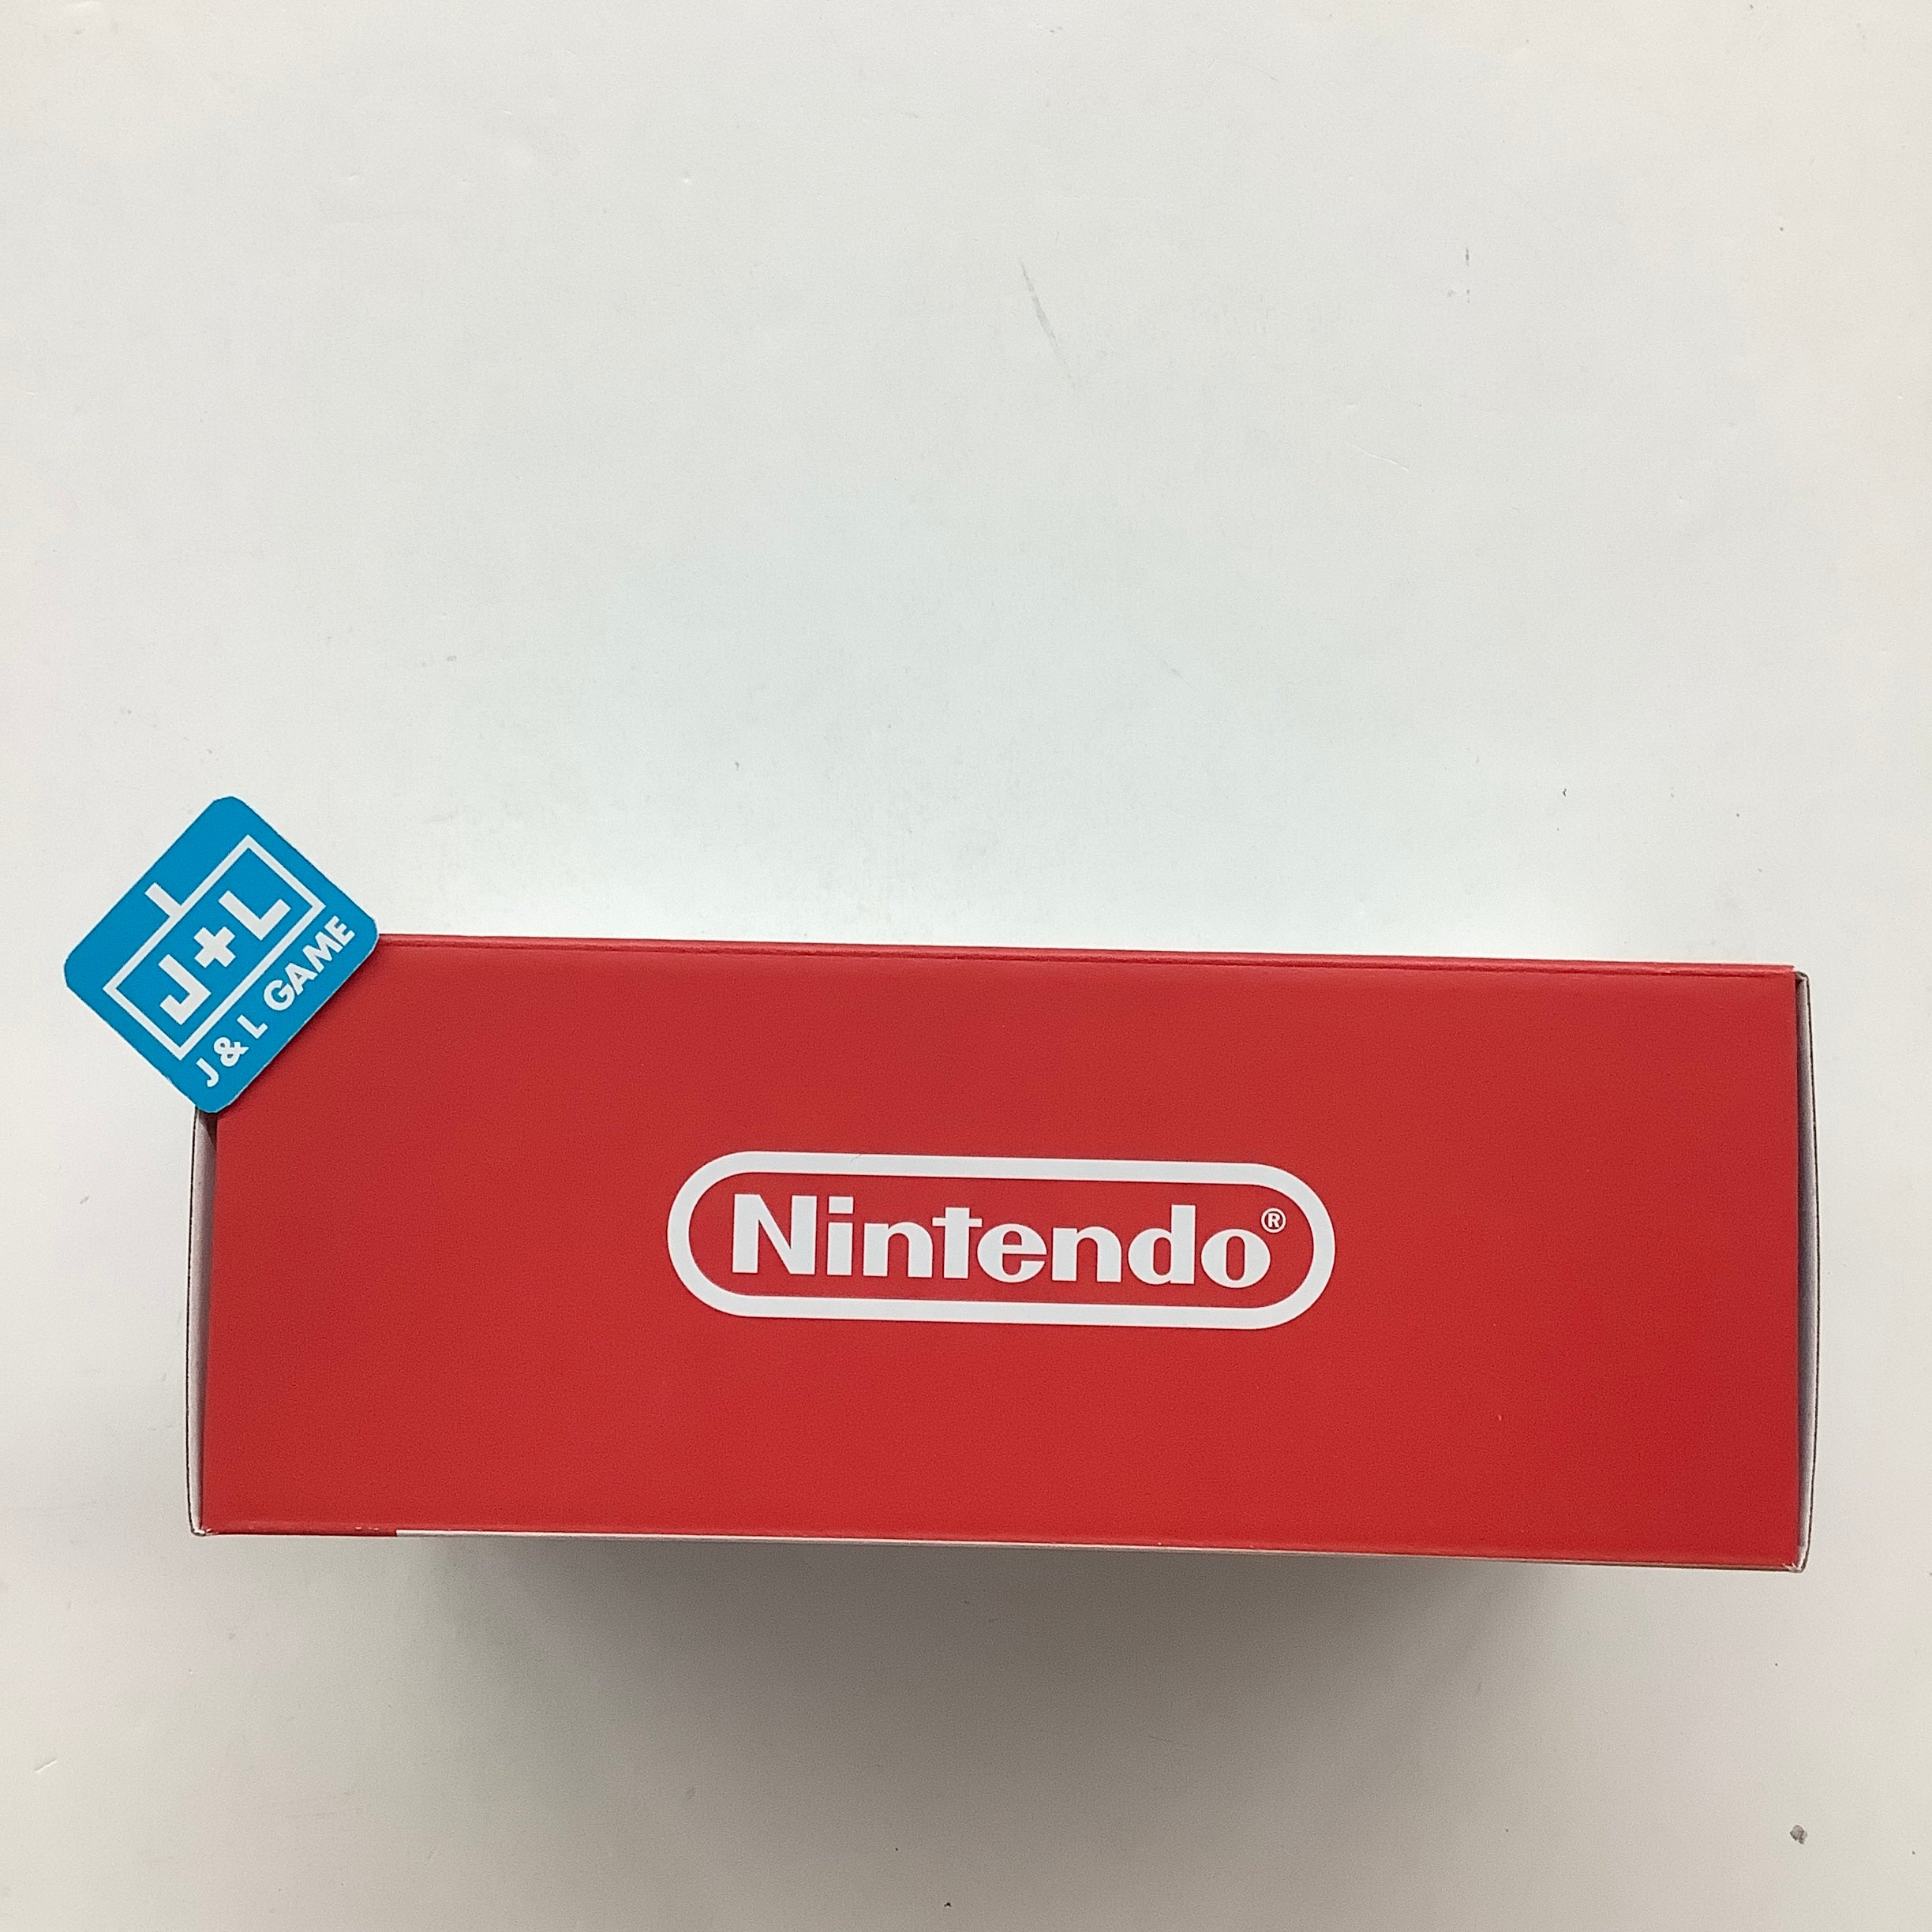 Nintendo Switch Lite Console (Coral) - (NSW) Nintendo Switch Consoles Nintendo   